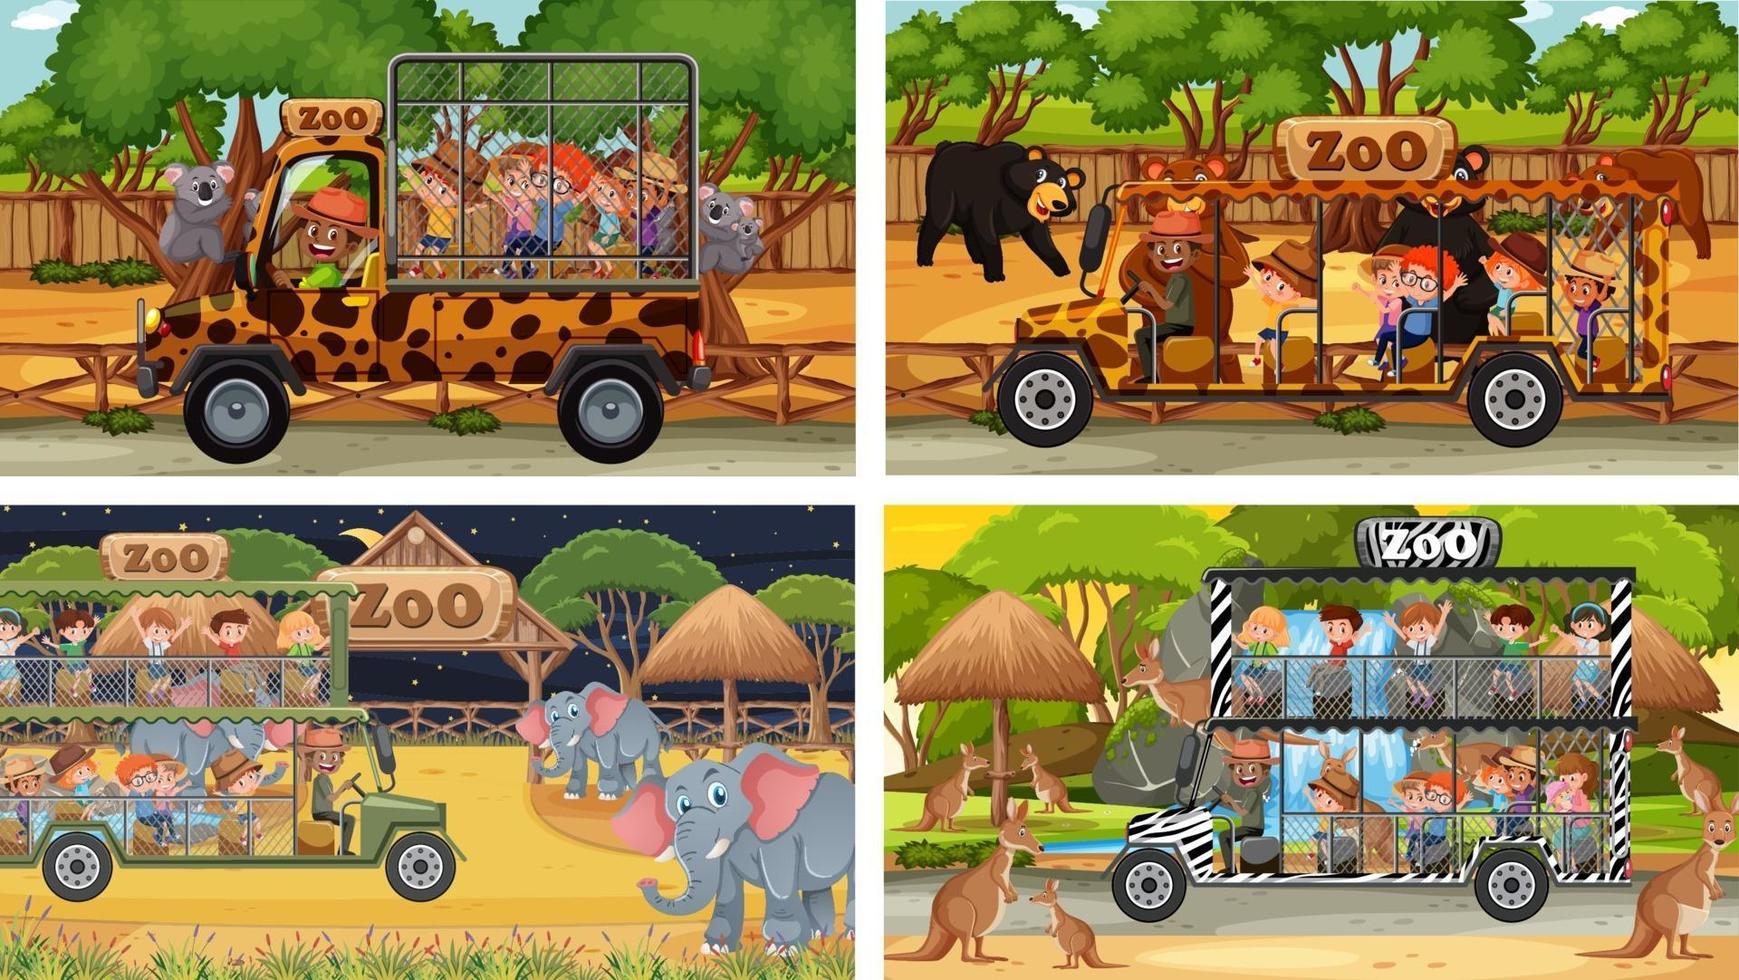 Set of different safari scenes with animals and kids cartoon character vector